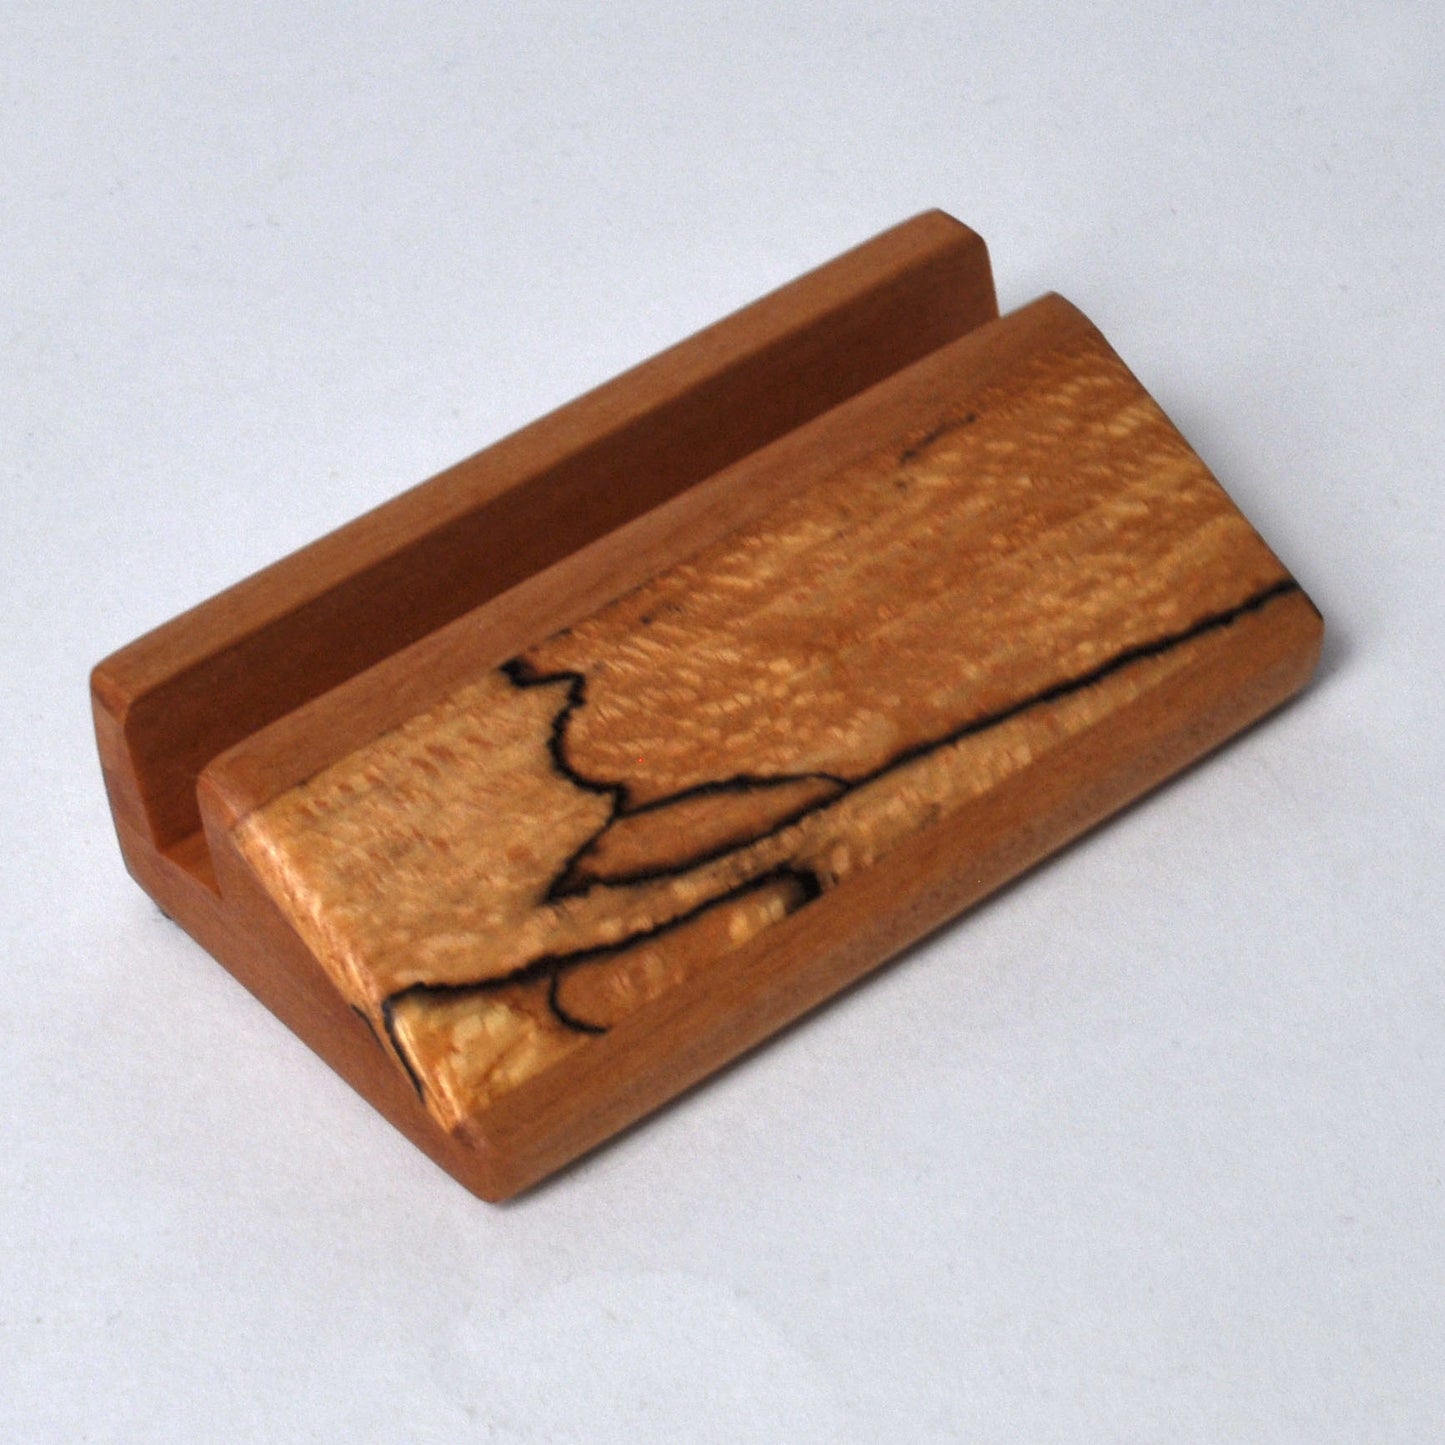 Doug Stowe - Wooden Spalted Cardholder